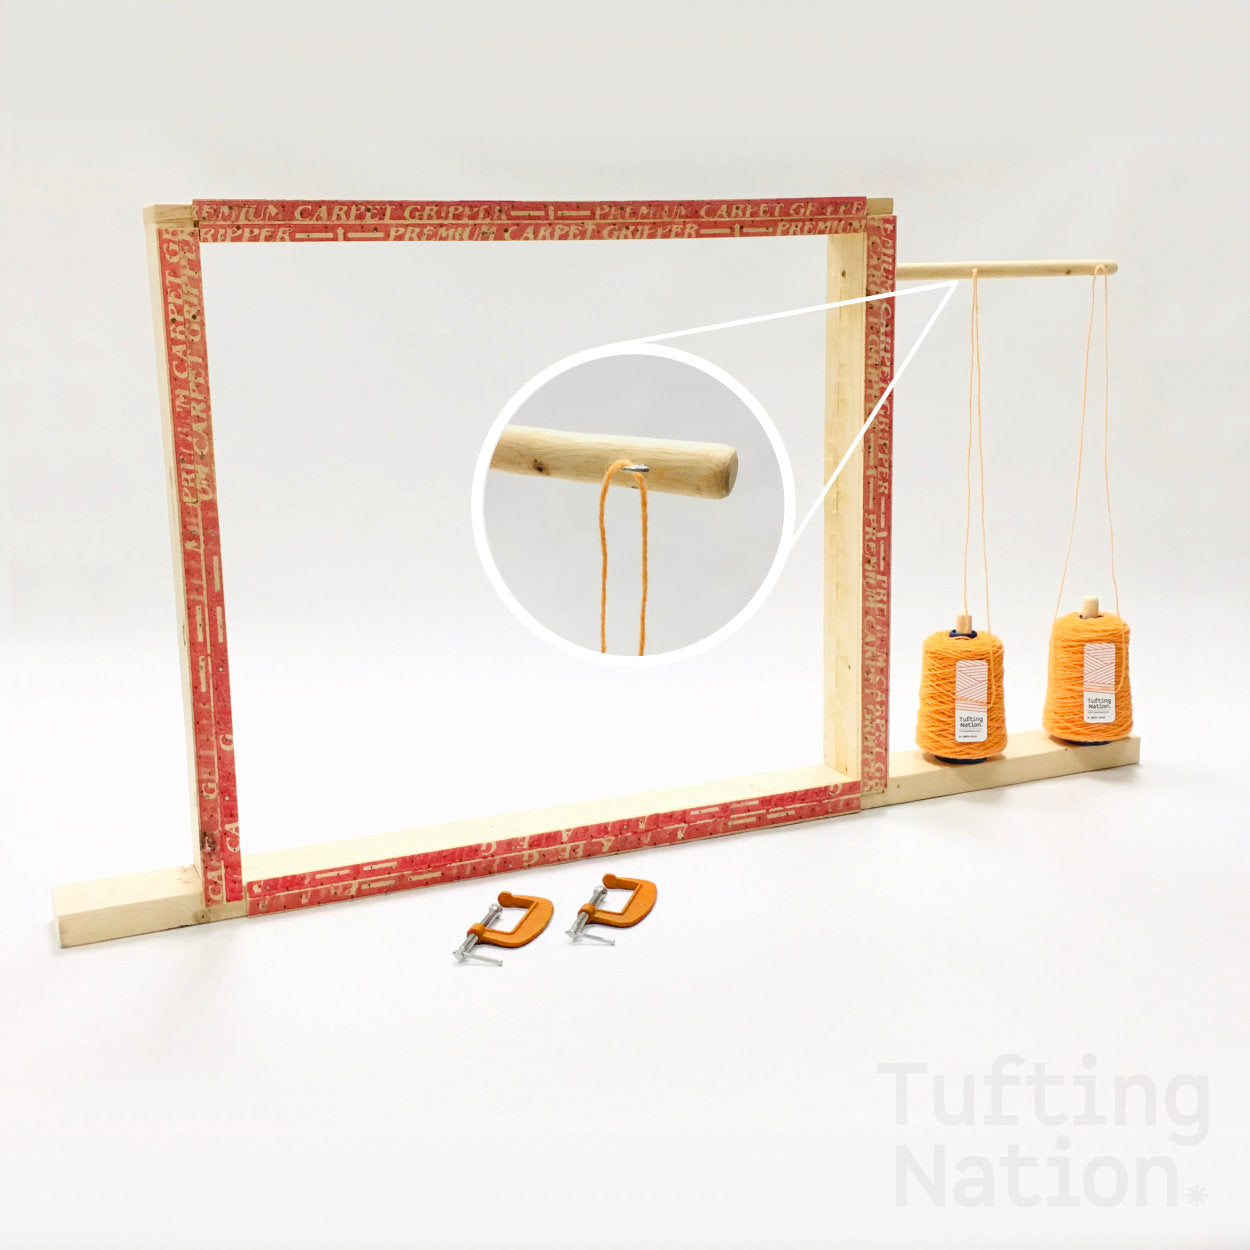 Full equipped Tufting frame to use with a Tufting Gun to make tufted rug | TuftingNation Canada